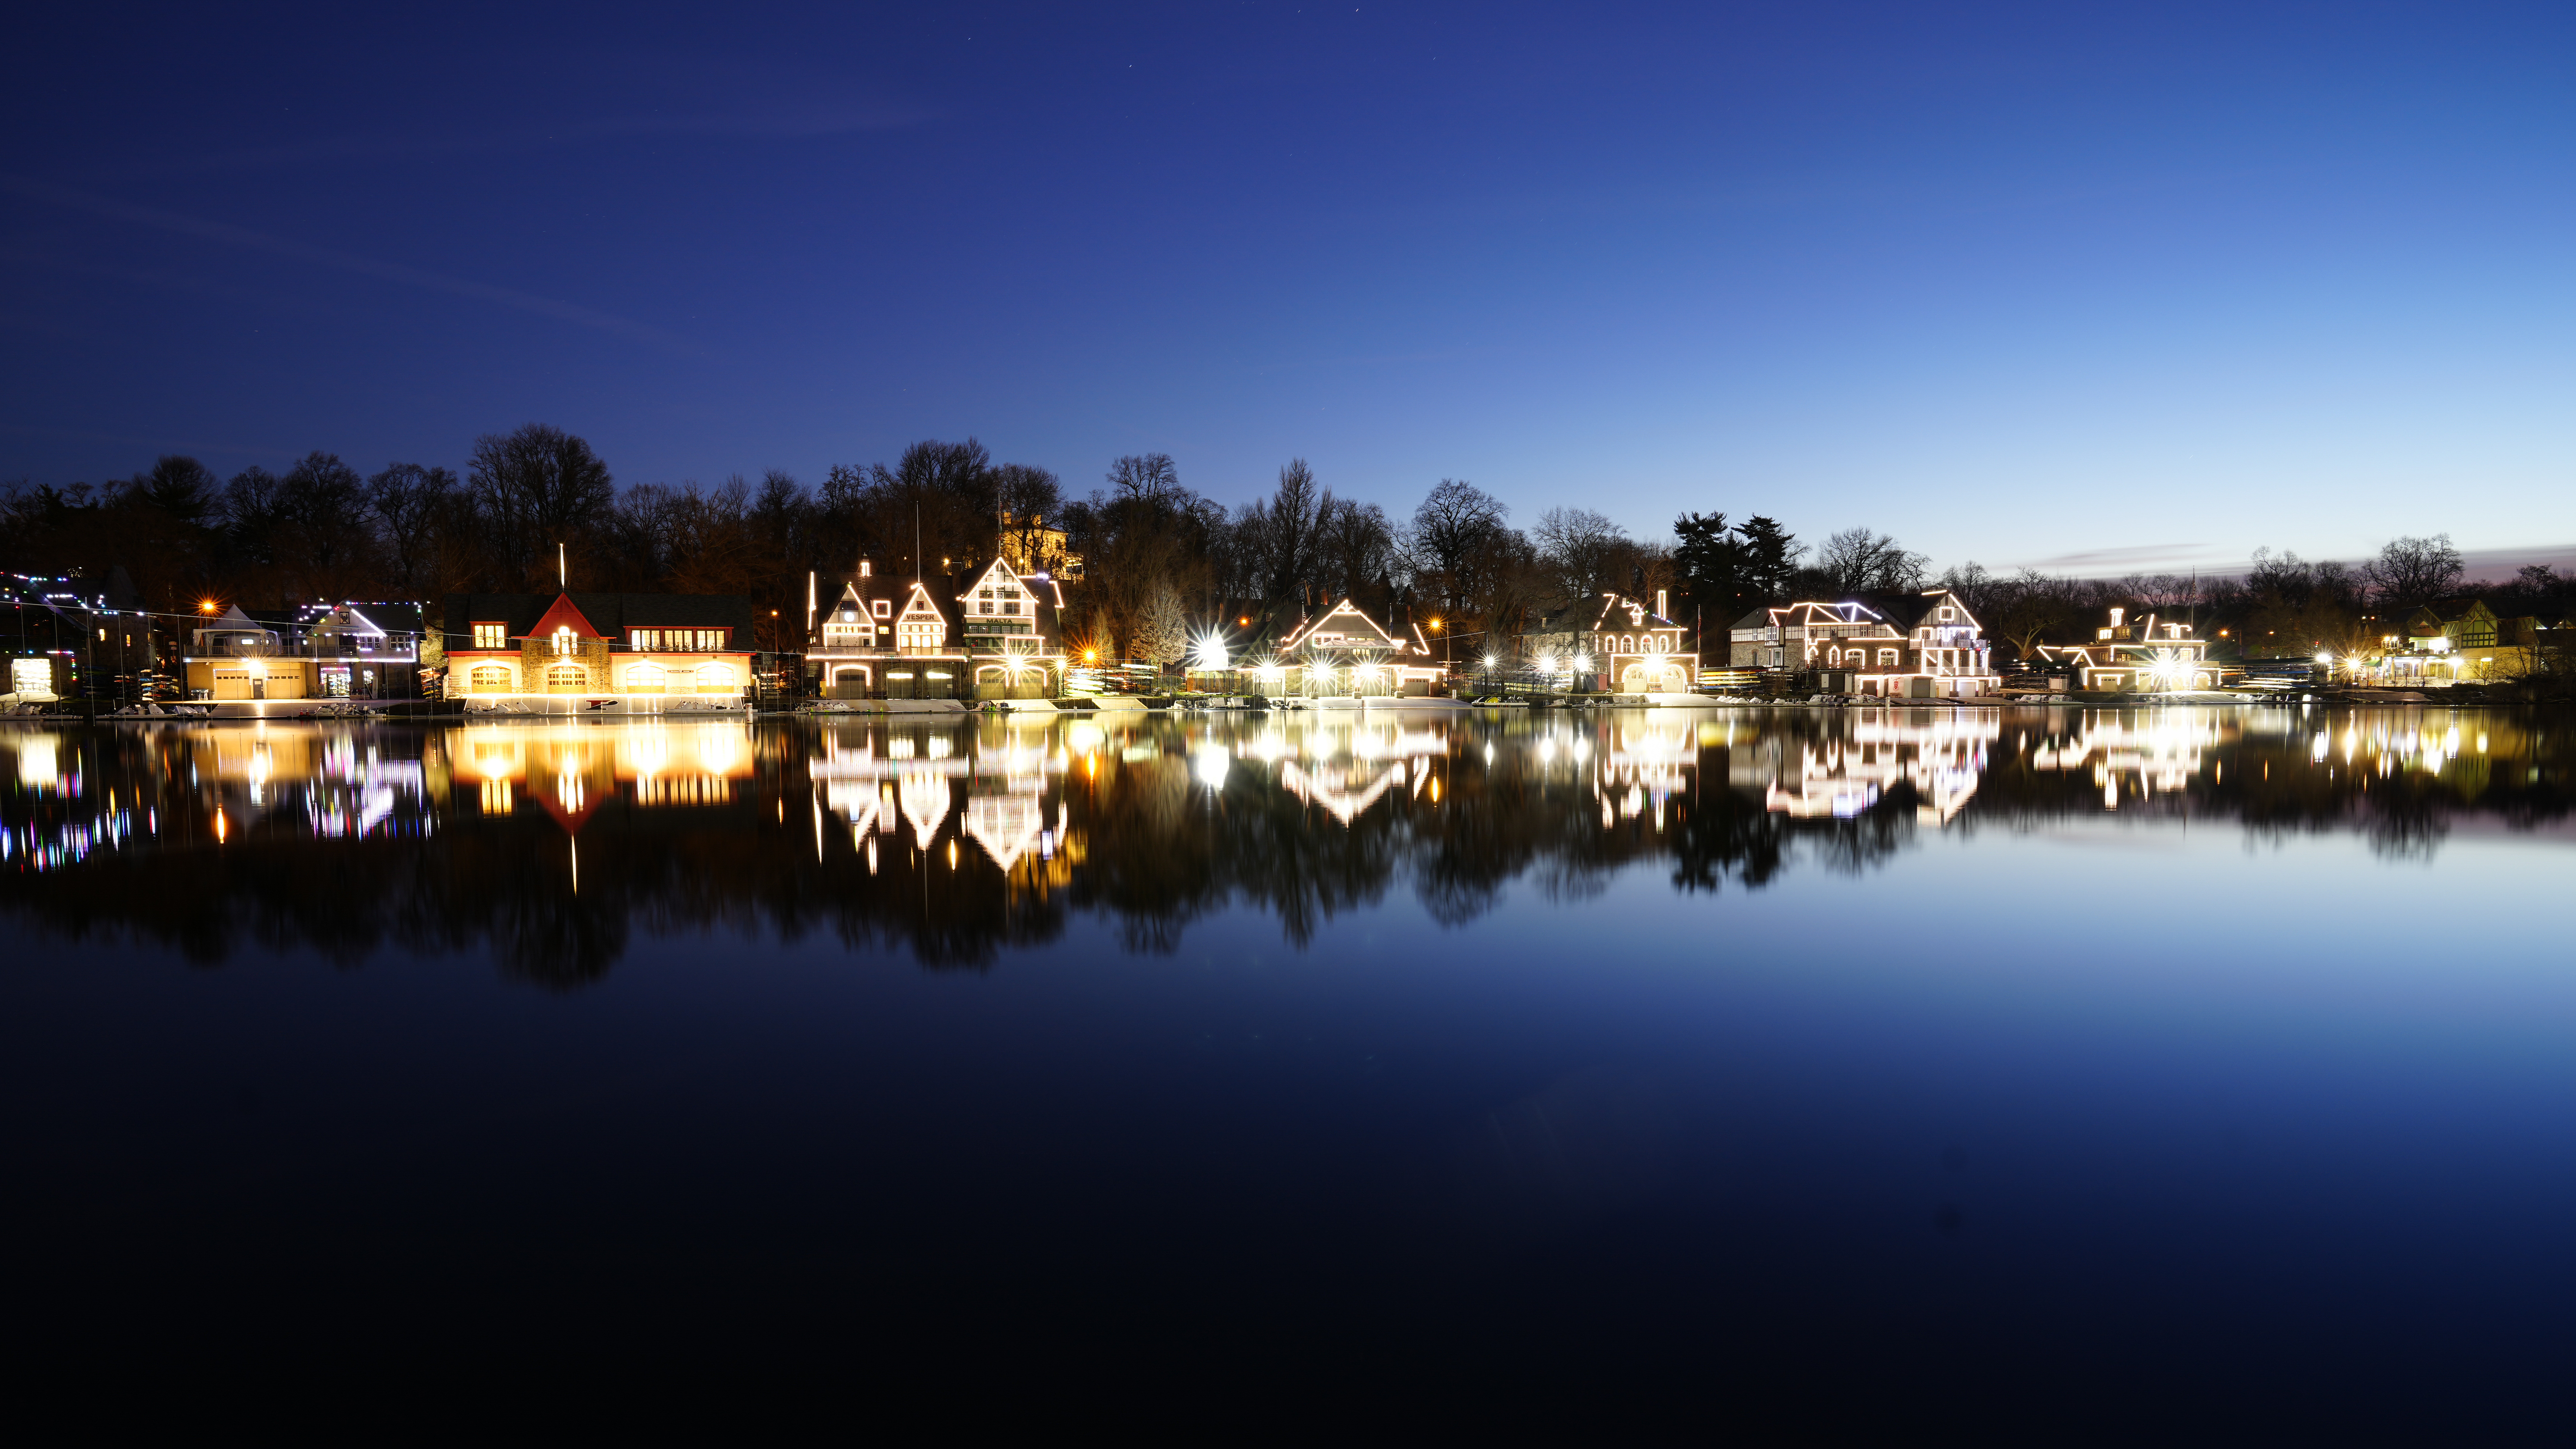 Lights illuminate the outline of structures on Boathouse Row along the banks of the Schuylkill Rive...